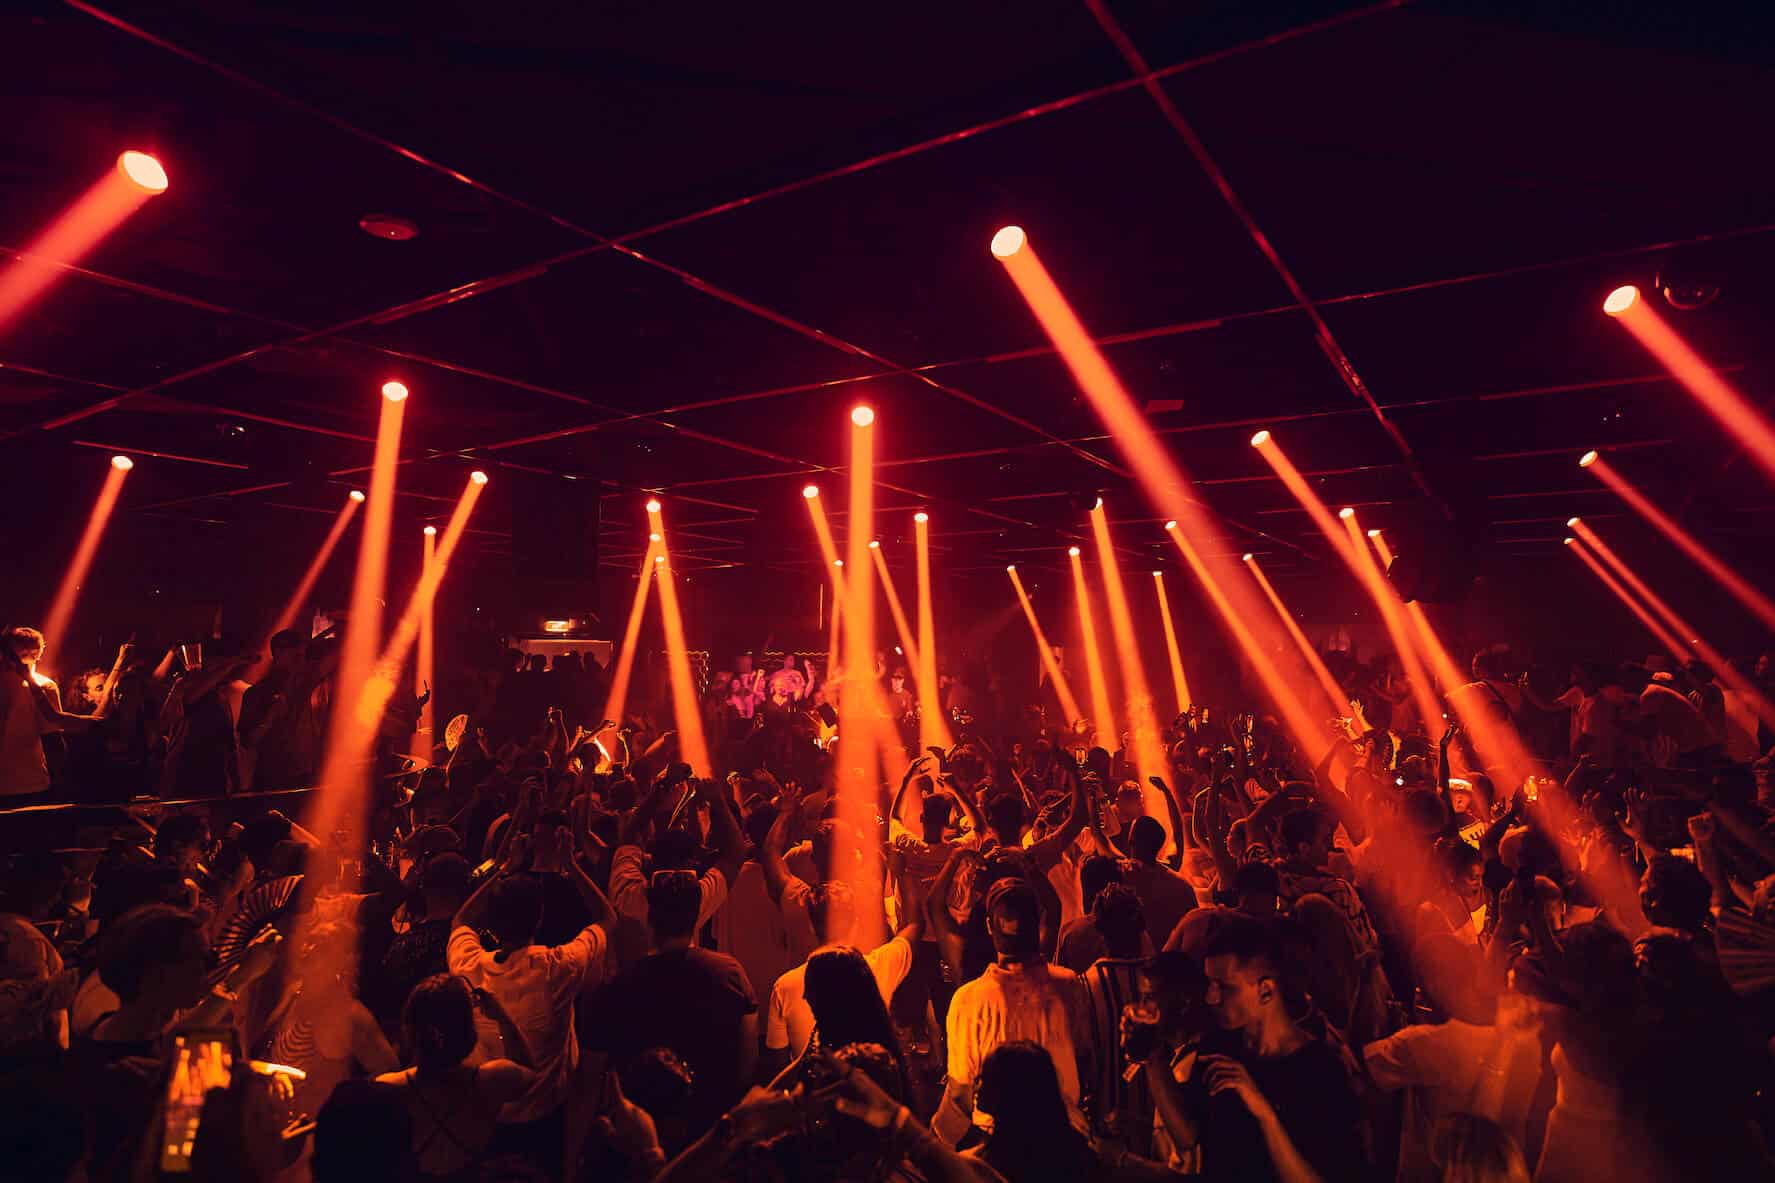 Paco Osuna continues NOW HERE residency at Hï’s Club Room